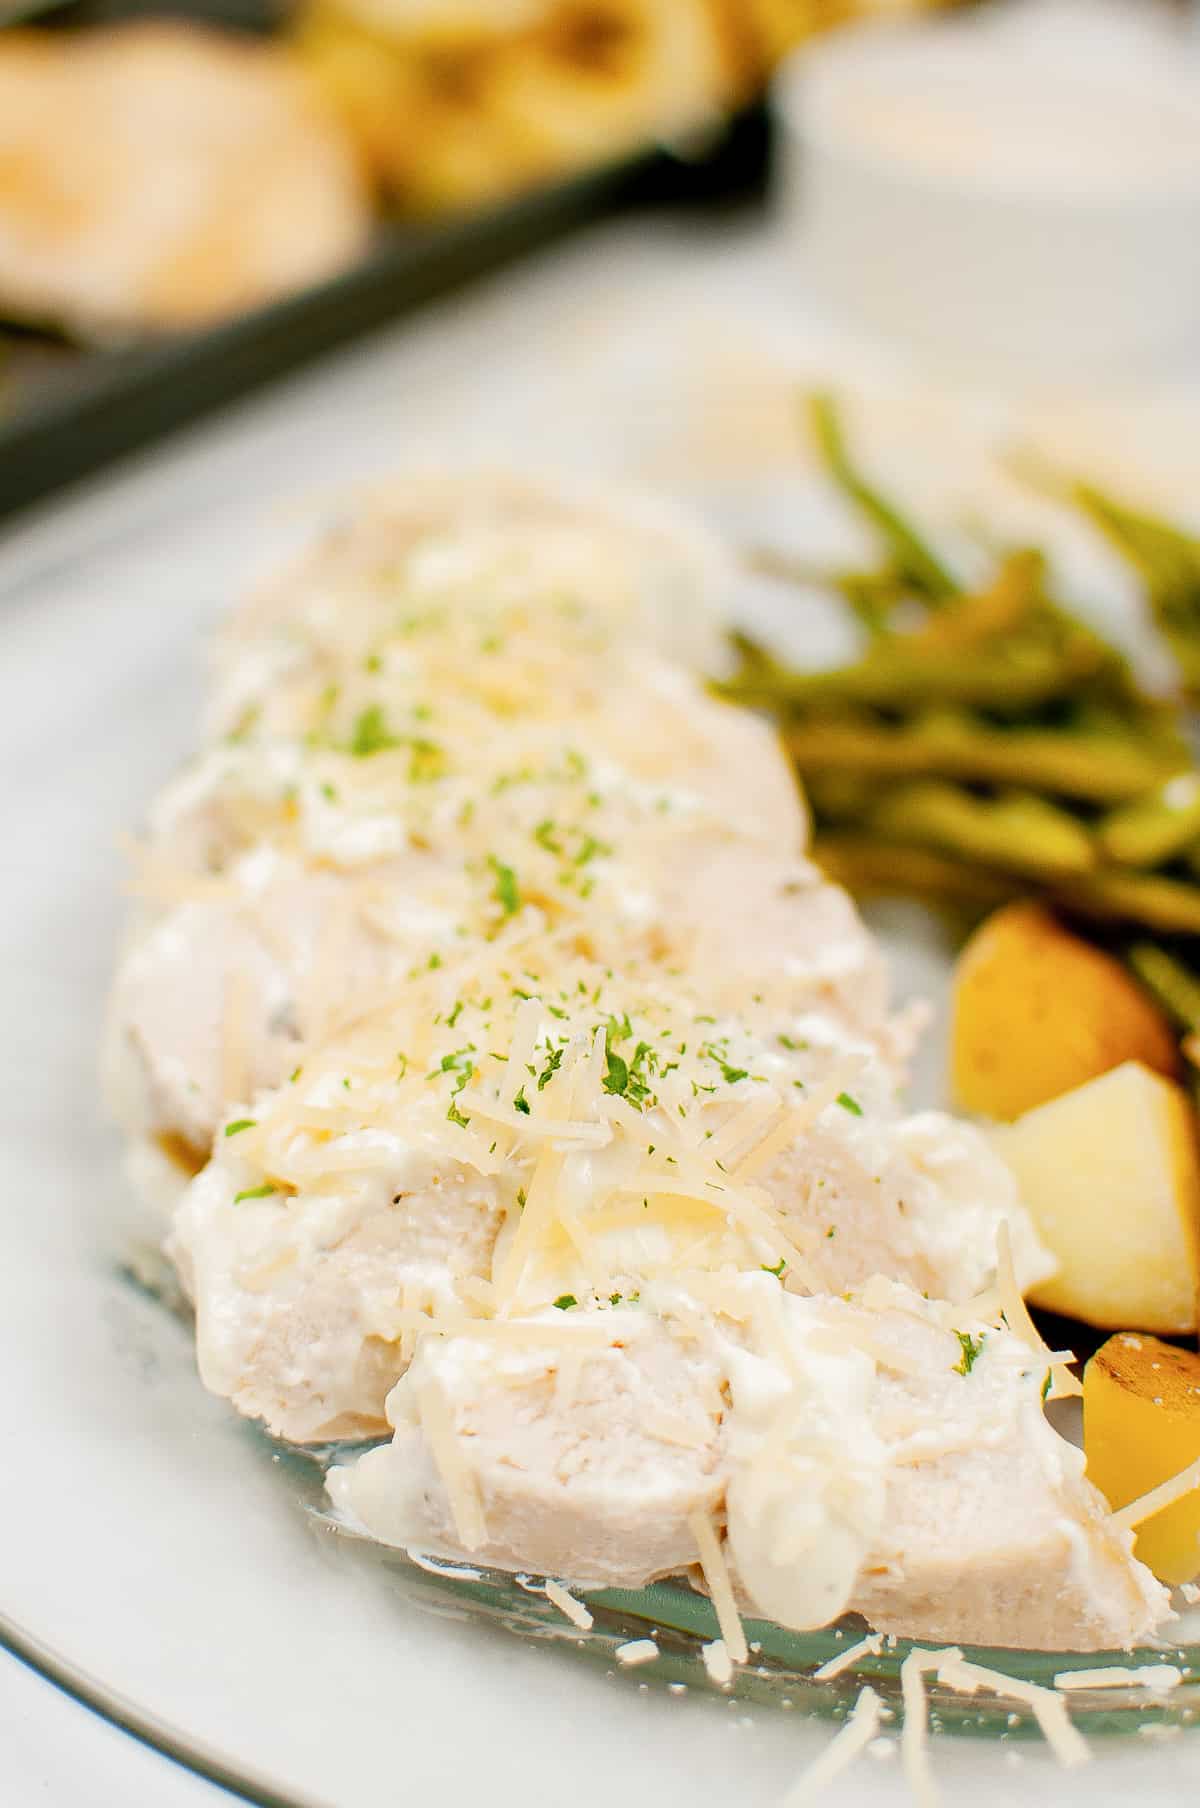 Creamy garlic chicken served with with green beans, potatoes, and topped with a creamy garlic sauce